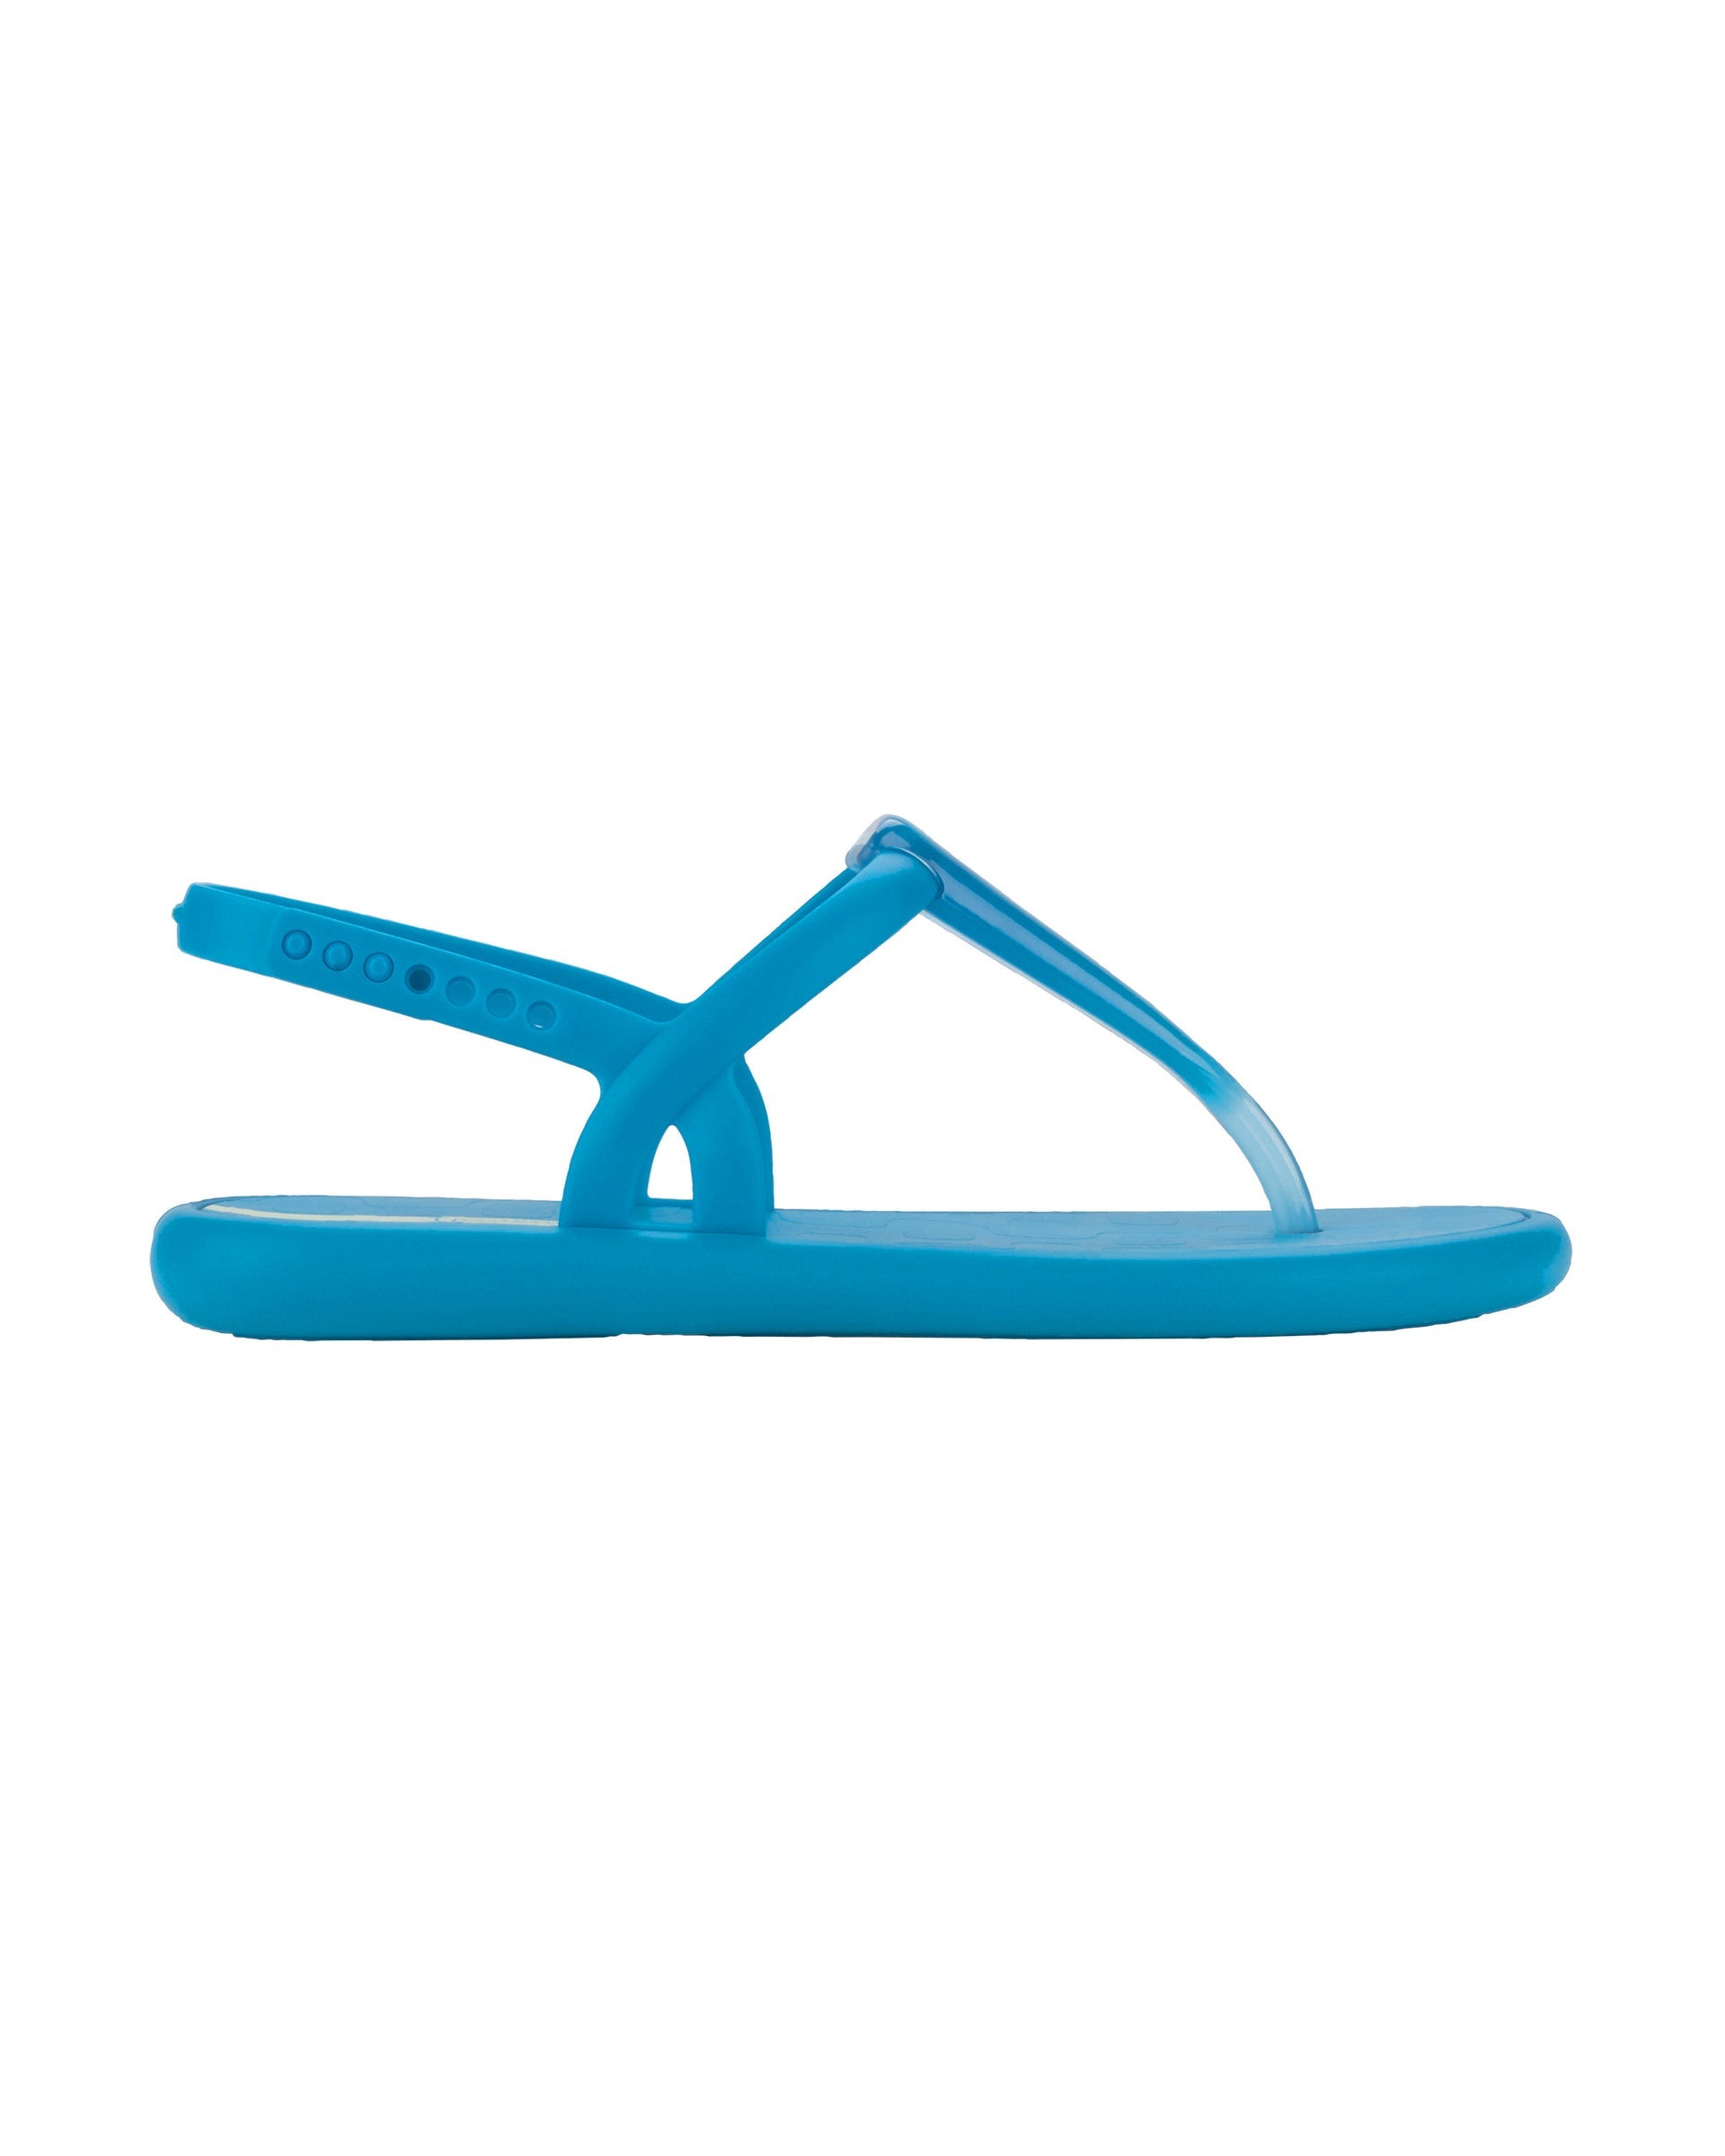 Outer side view of a blue Ipanema Glossy women's t-strap sandal.